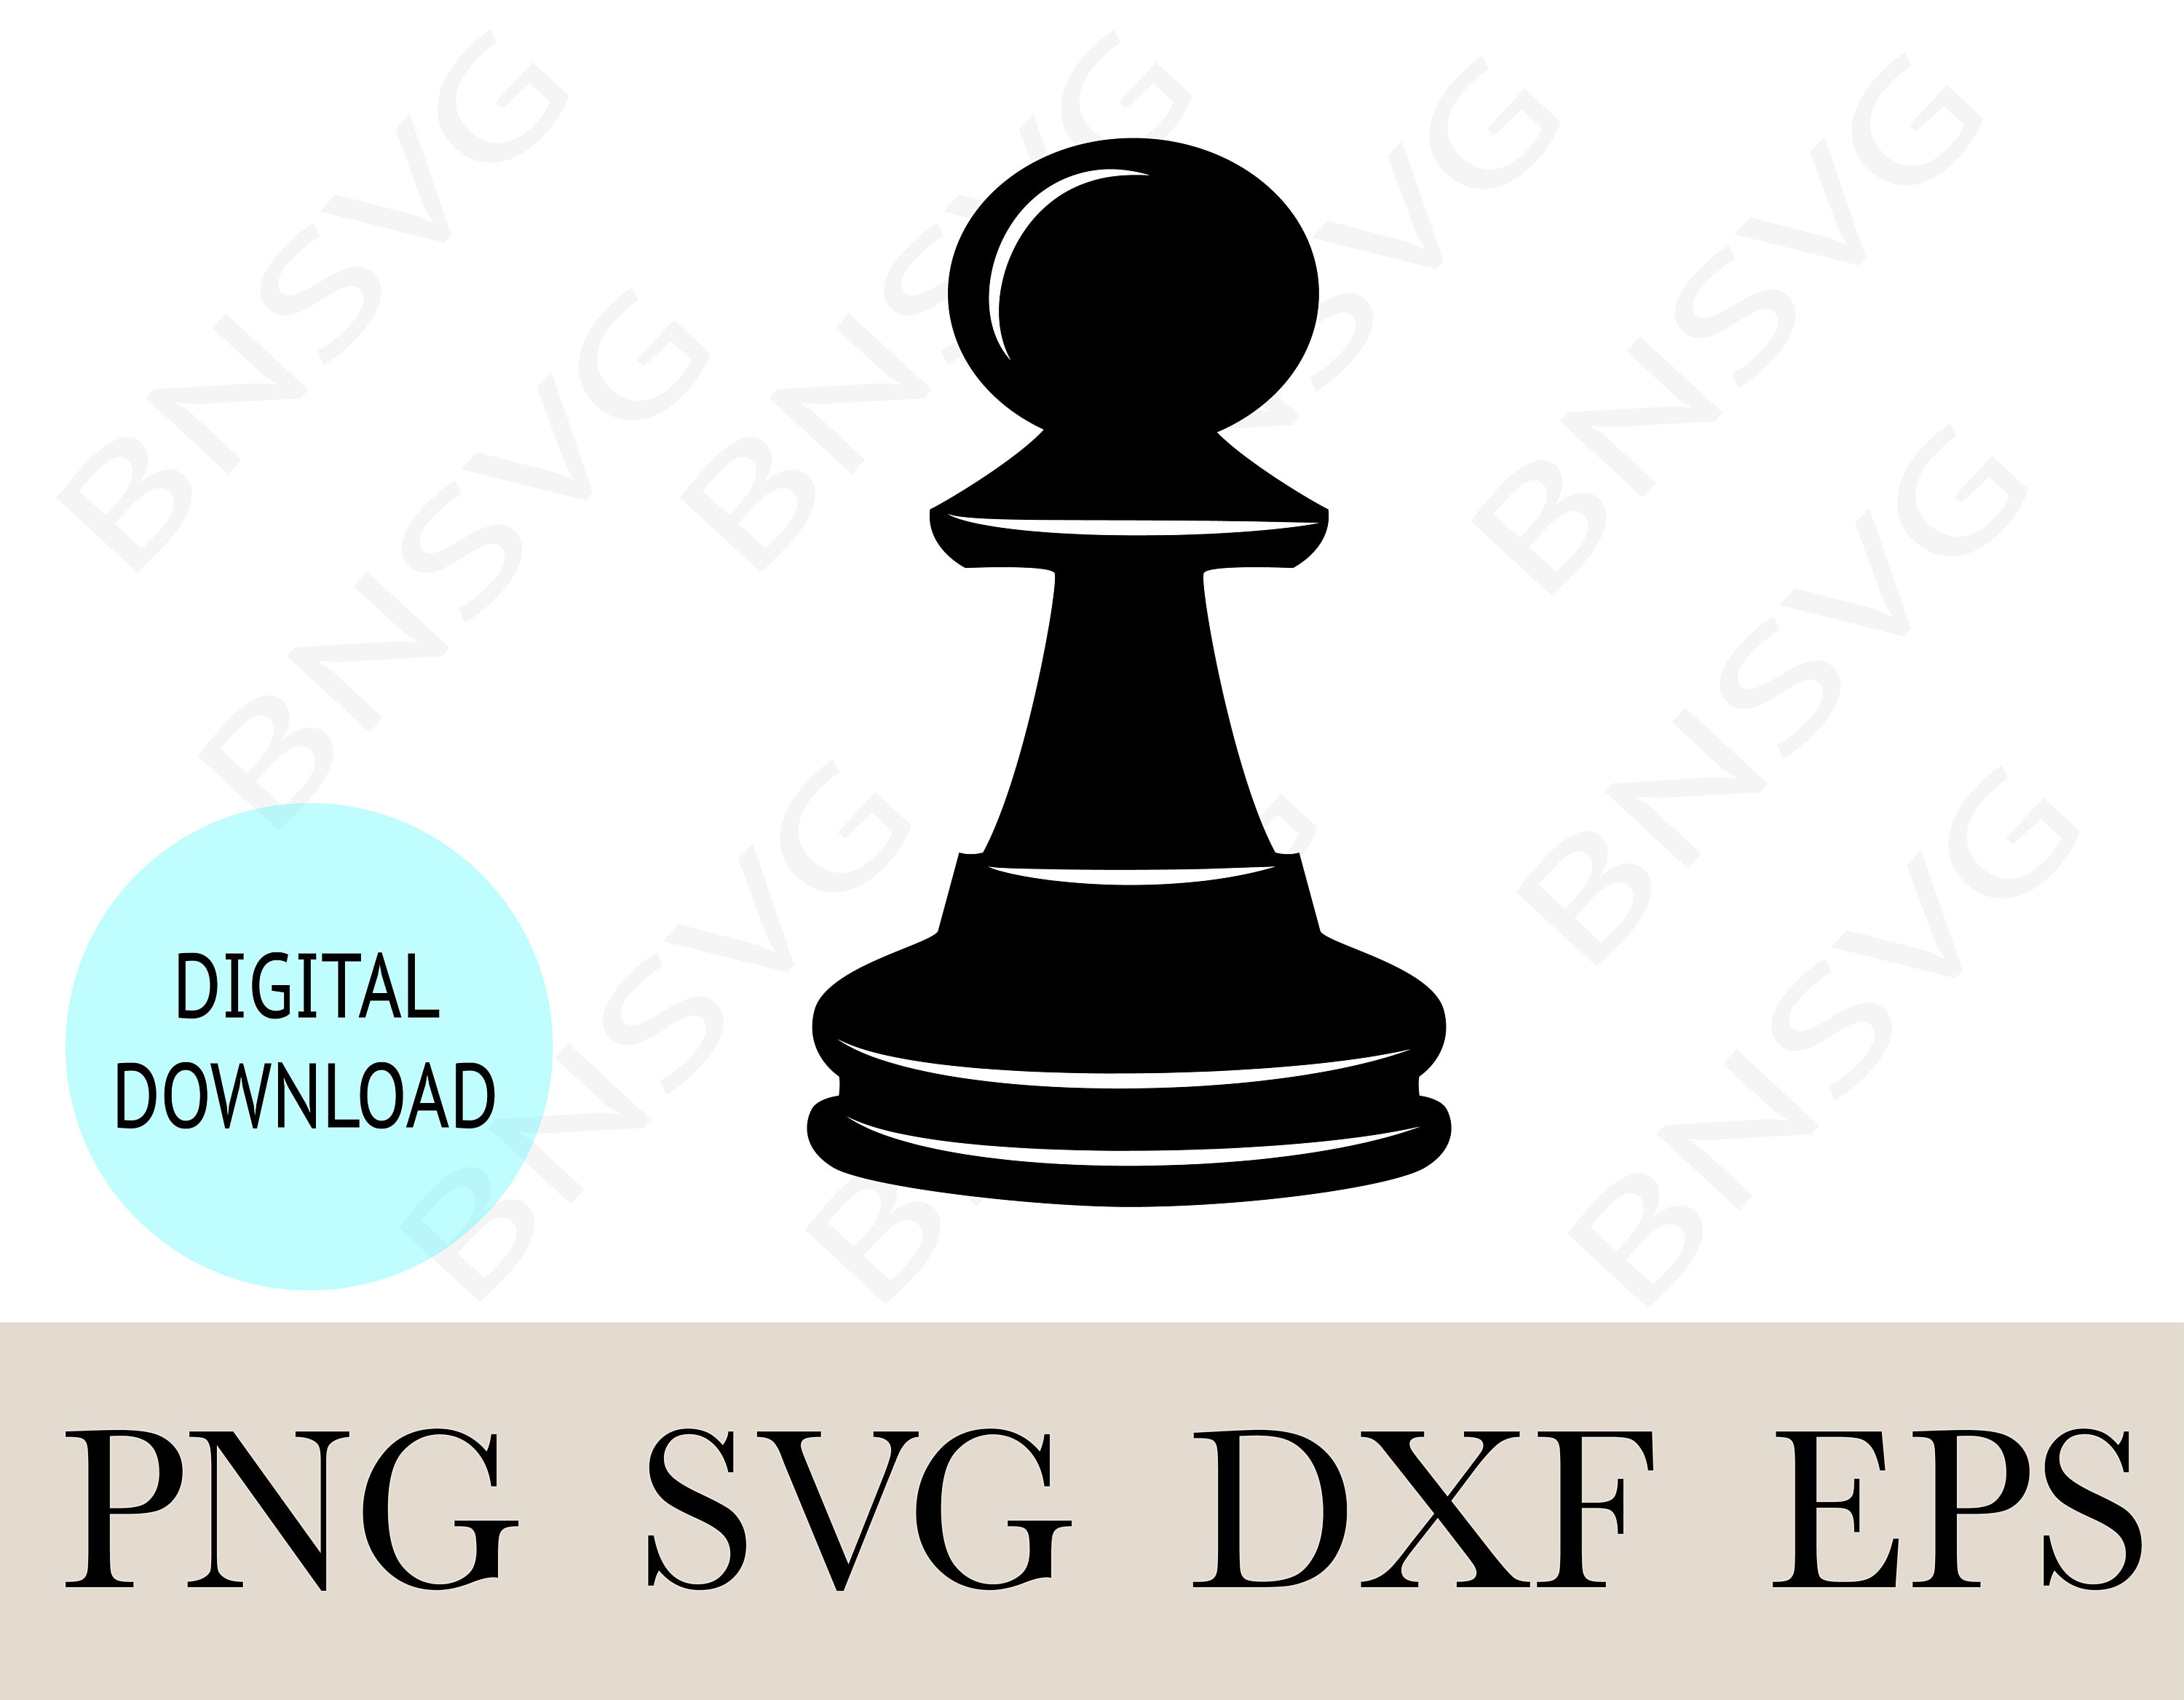 Pawn Chess Piece PNG & SVG Design For T-Shirts